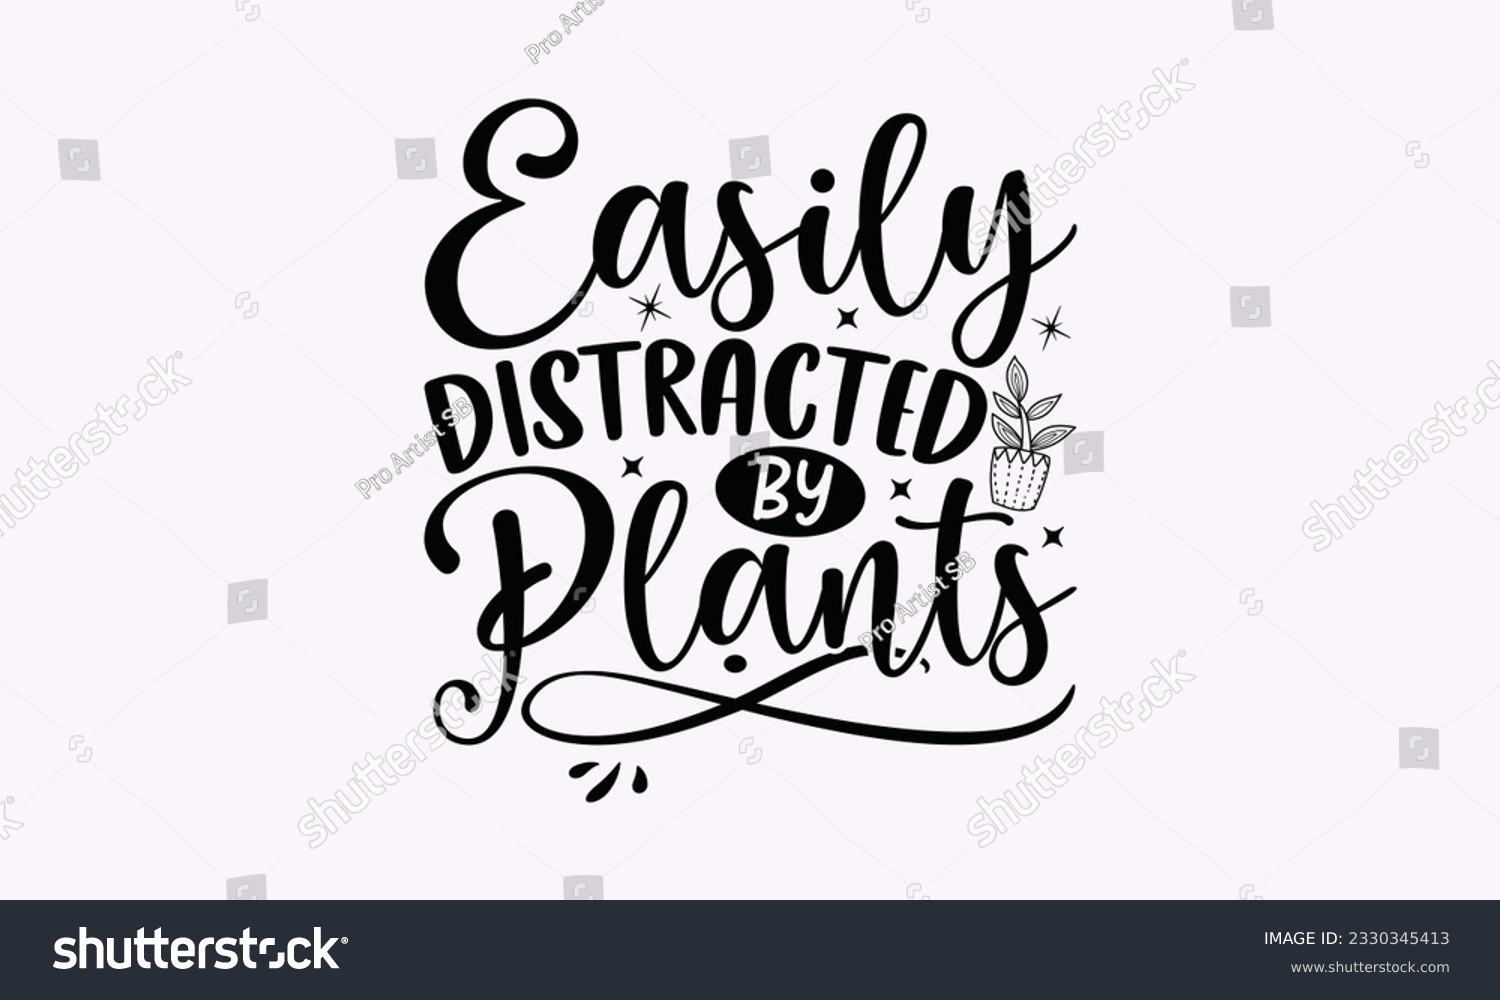 SVG of Easily distracted by plants - Gardening SVG Design, Flower Quotes, Calligraphy graphic design, Typography poster with old style camera and quote. svg